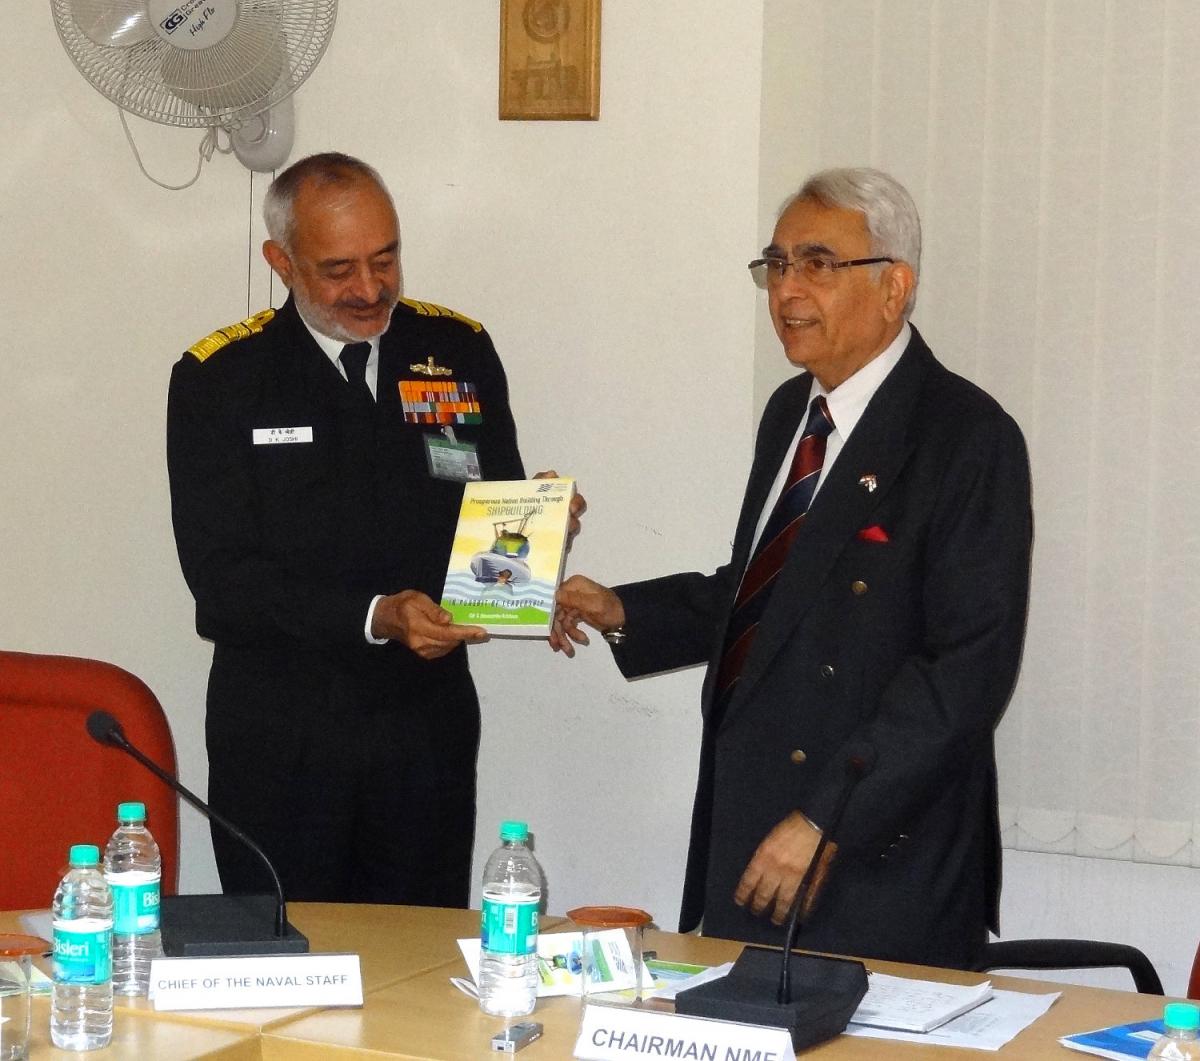 Chief of Naval Staff Admiral DK Joshi releasing the Book in the presence of Admiral (retd) Sureesh Mehta